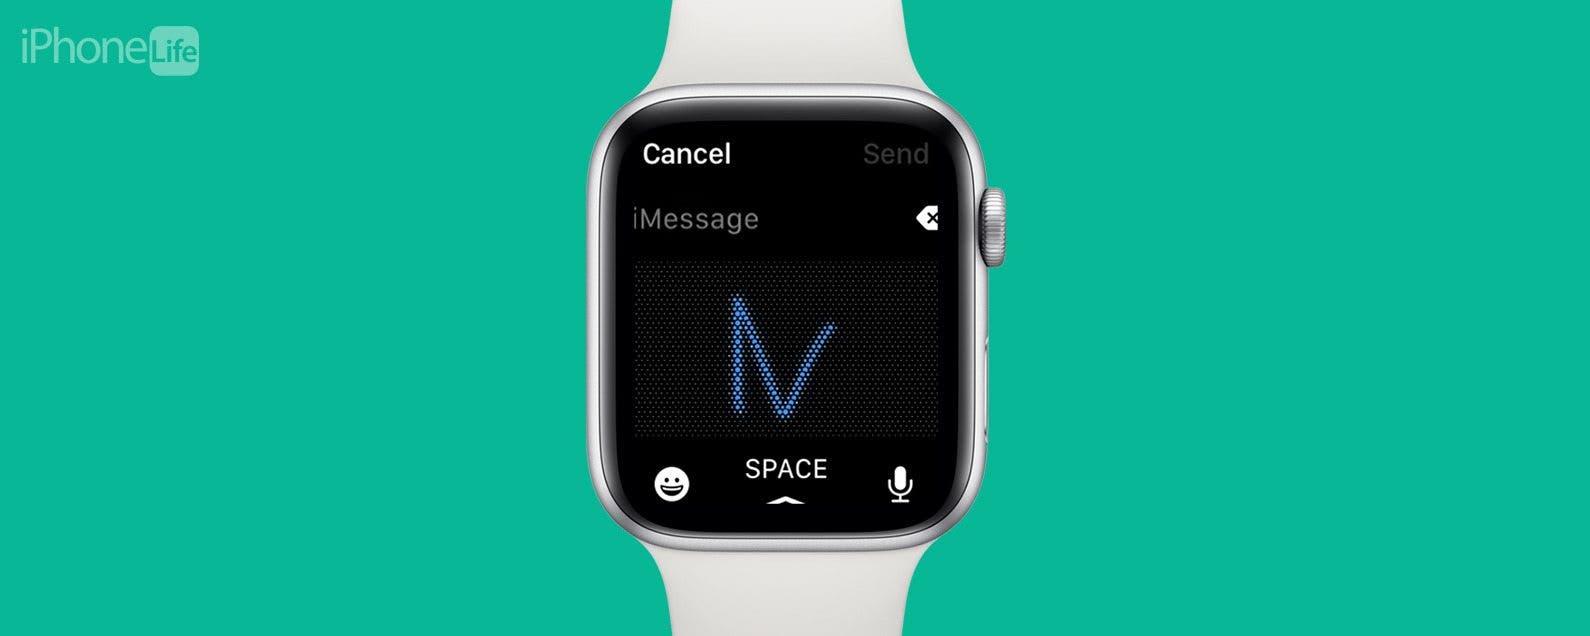 How to Transform Apple Watch: Switch from Keyboard to Scribble Effortlessly